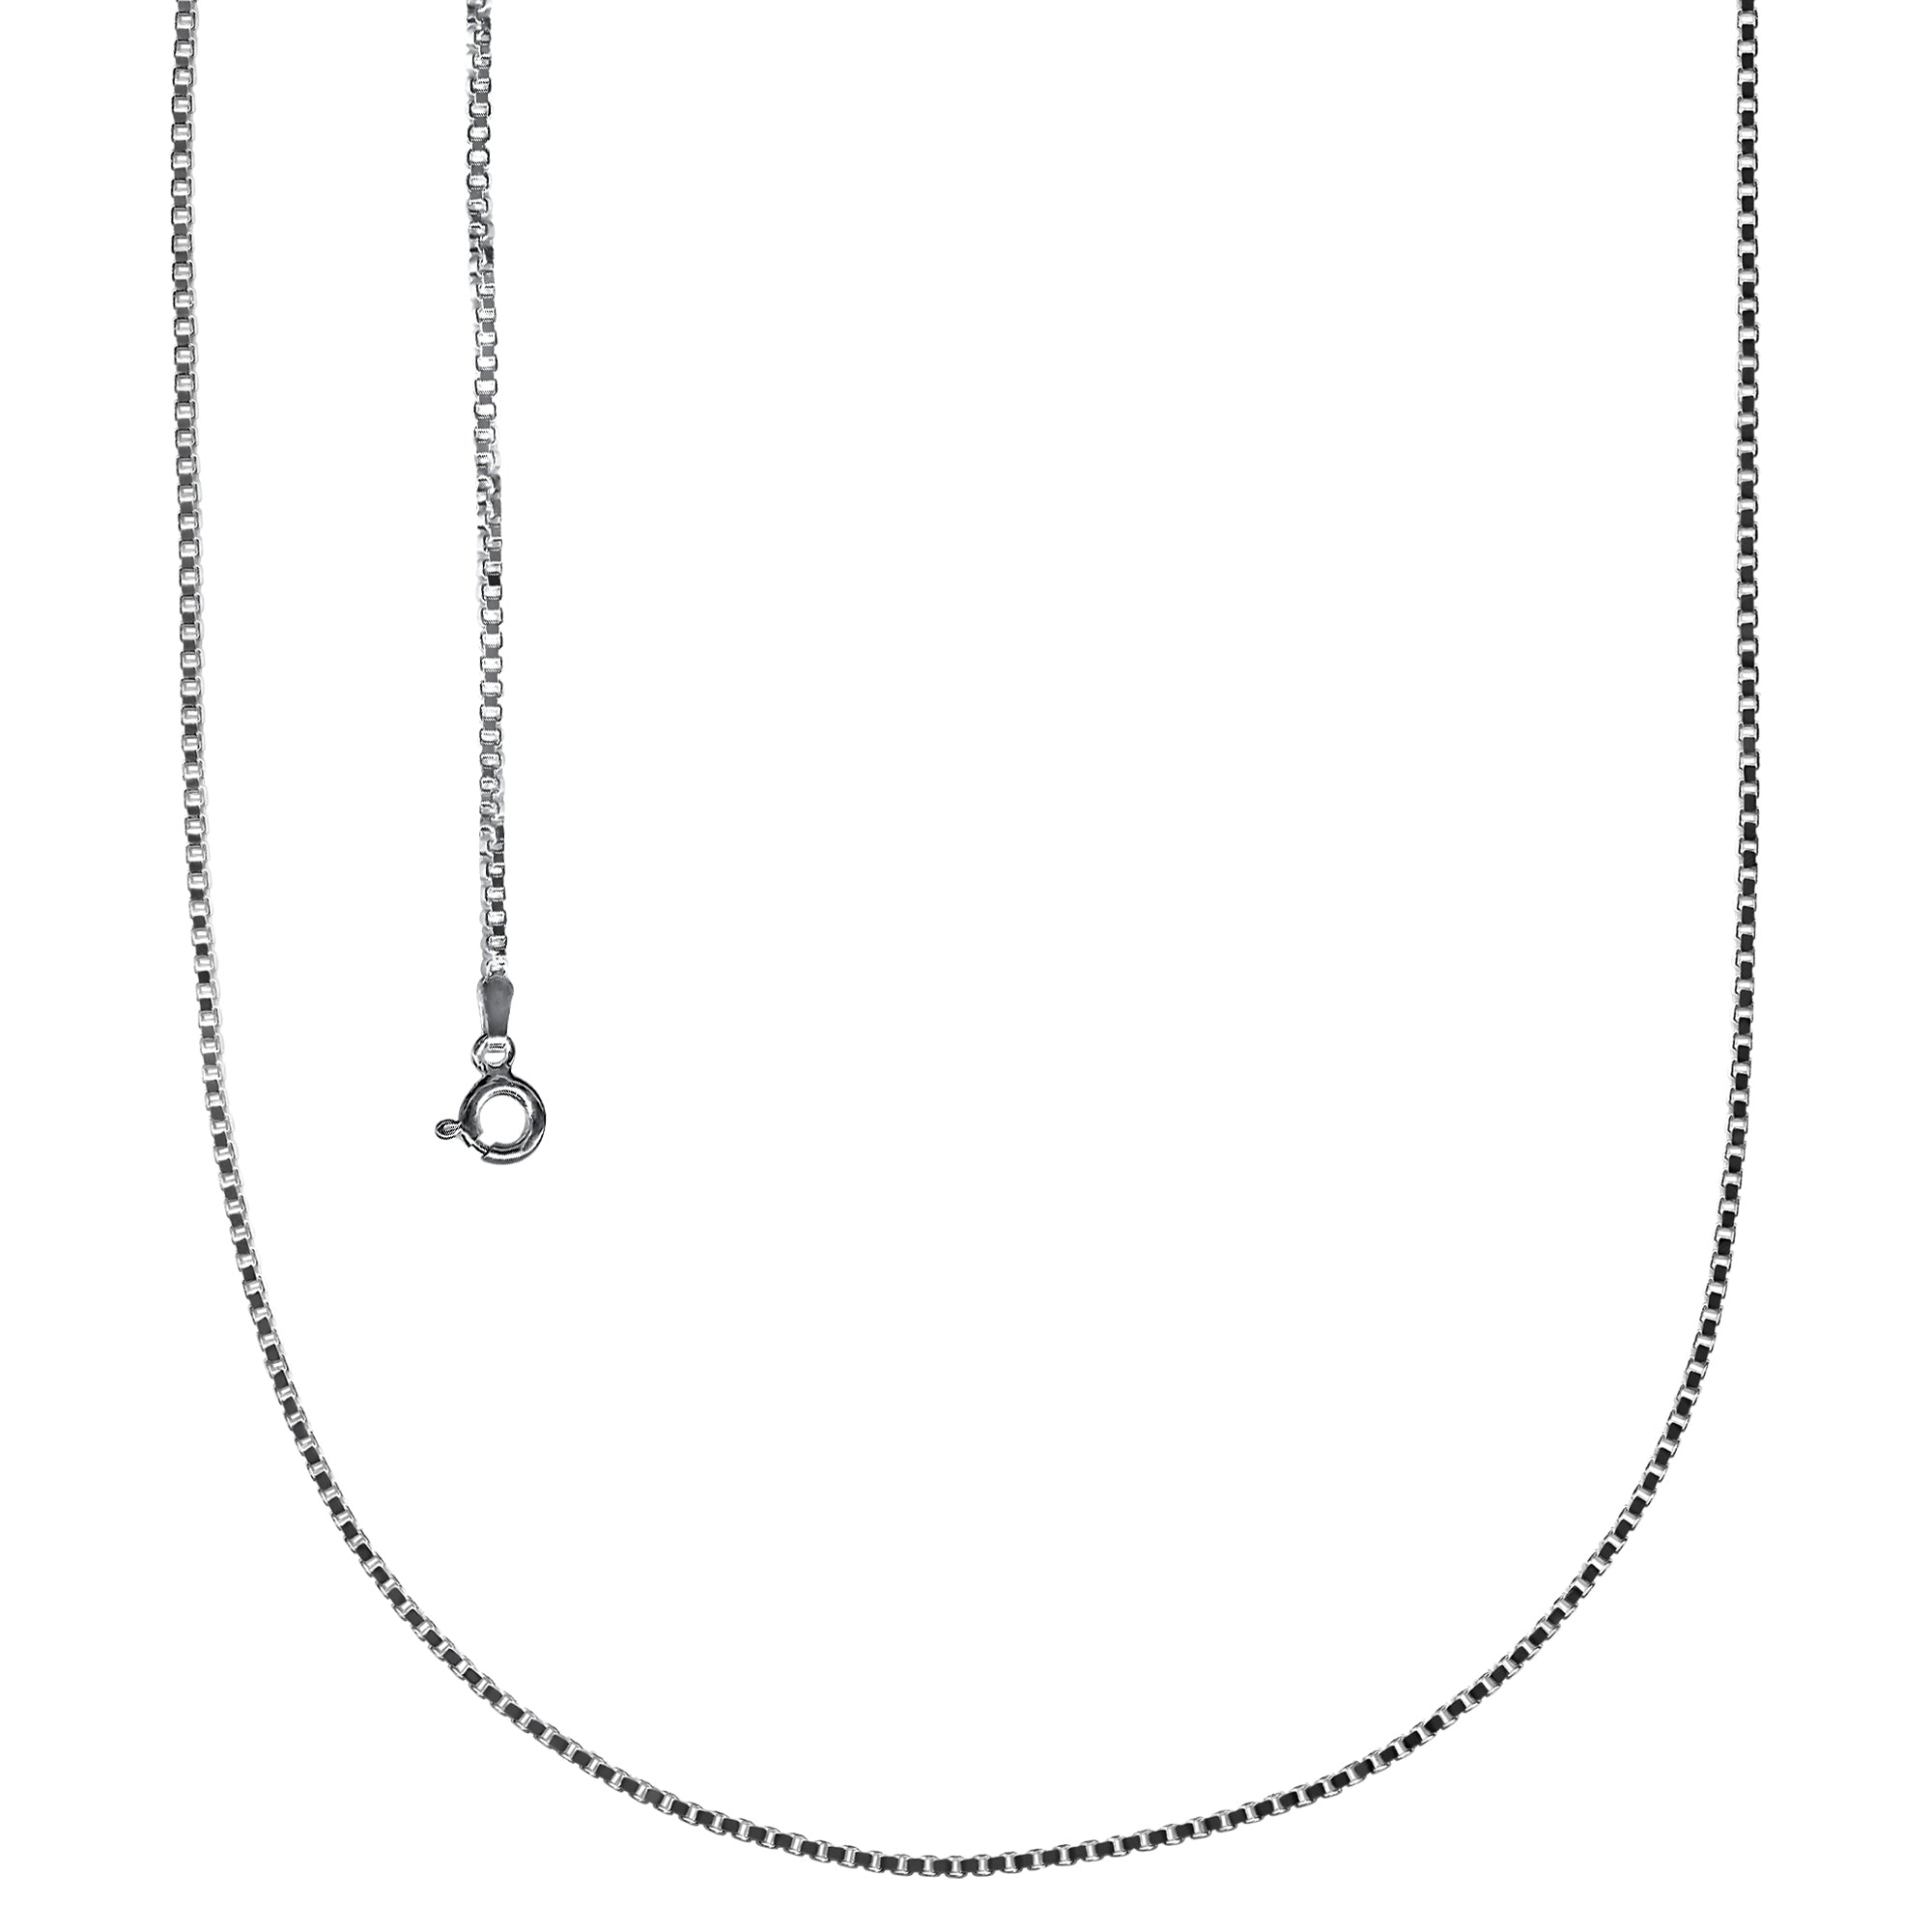 Box Chain in Sterling Silver (24inches x 1.5mm wide)